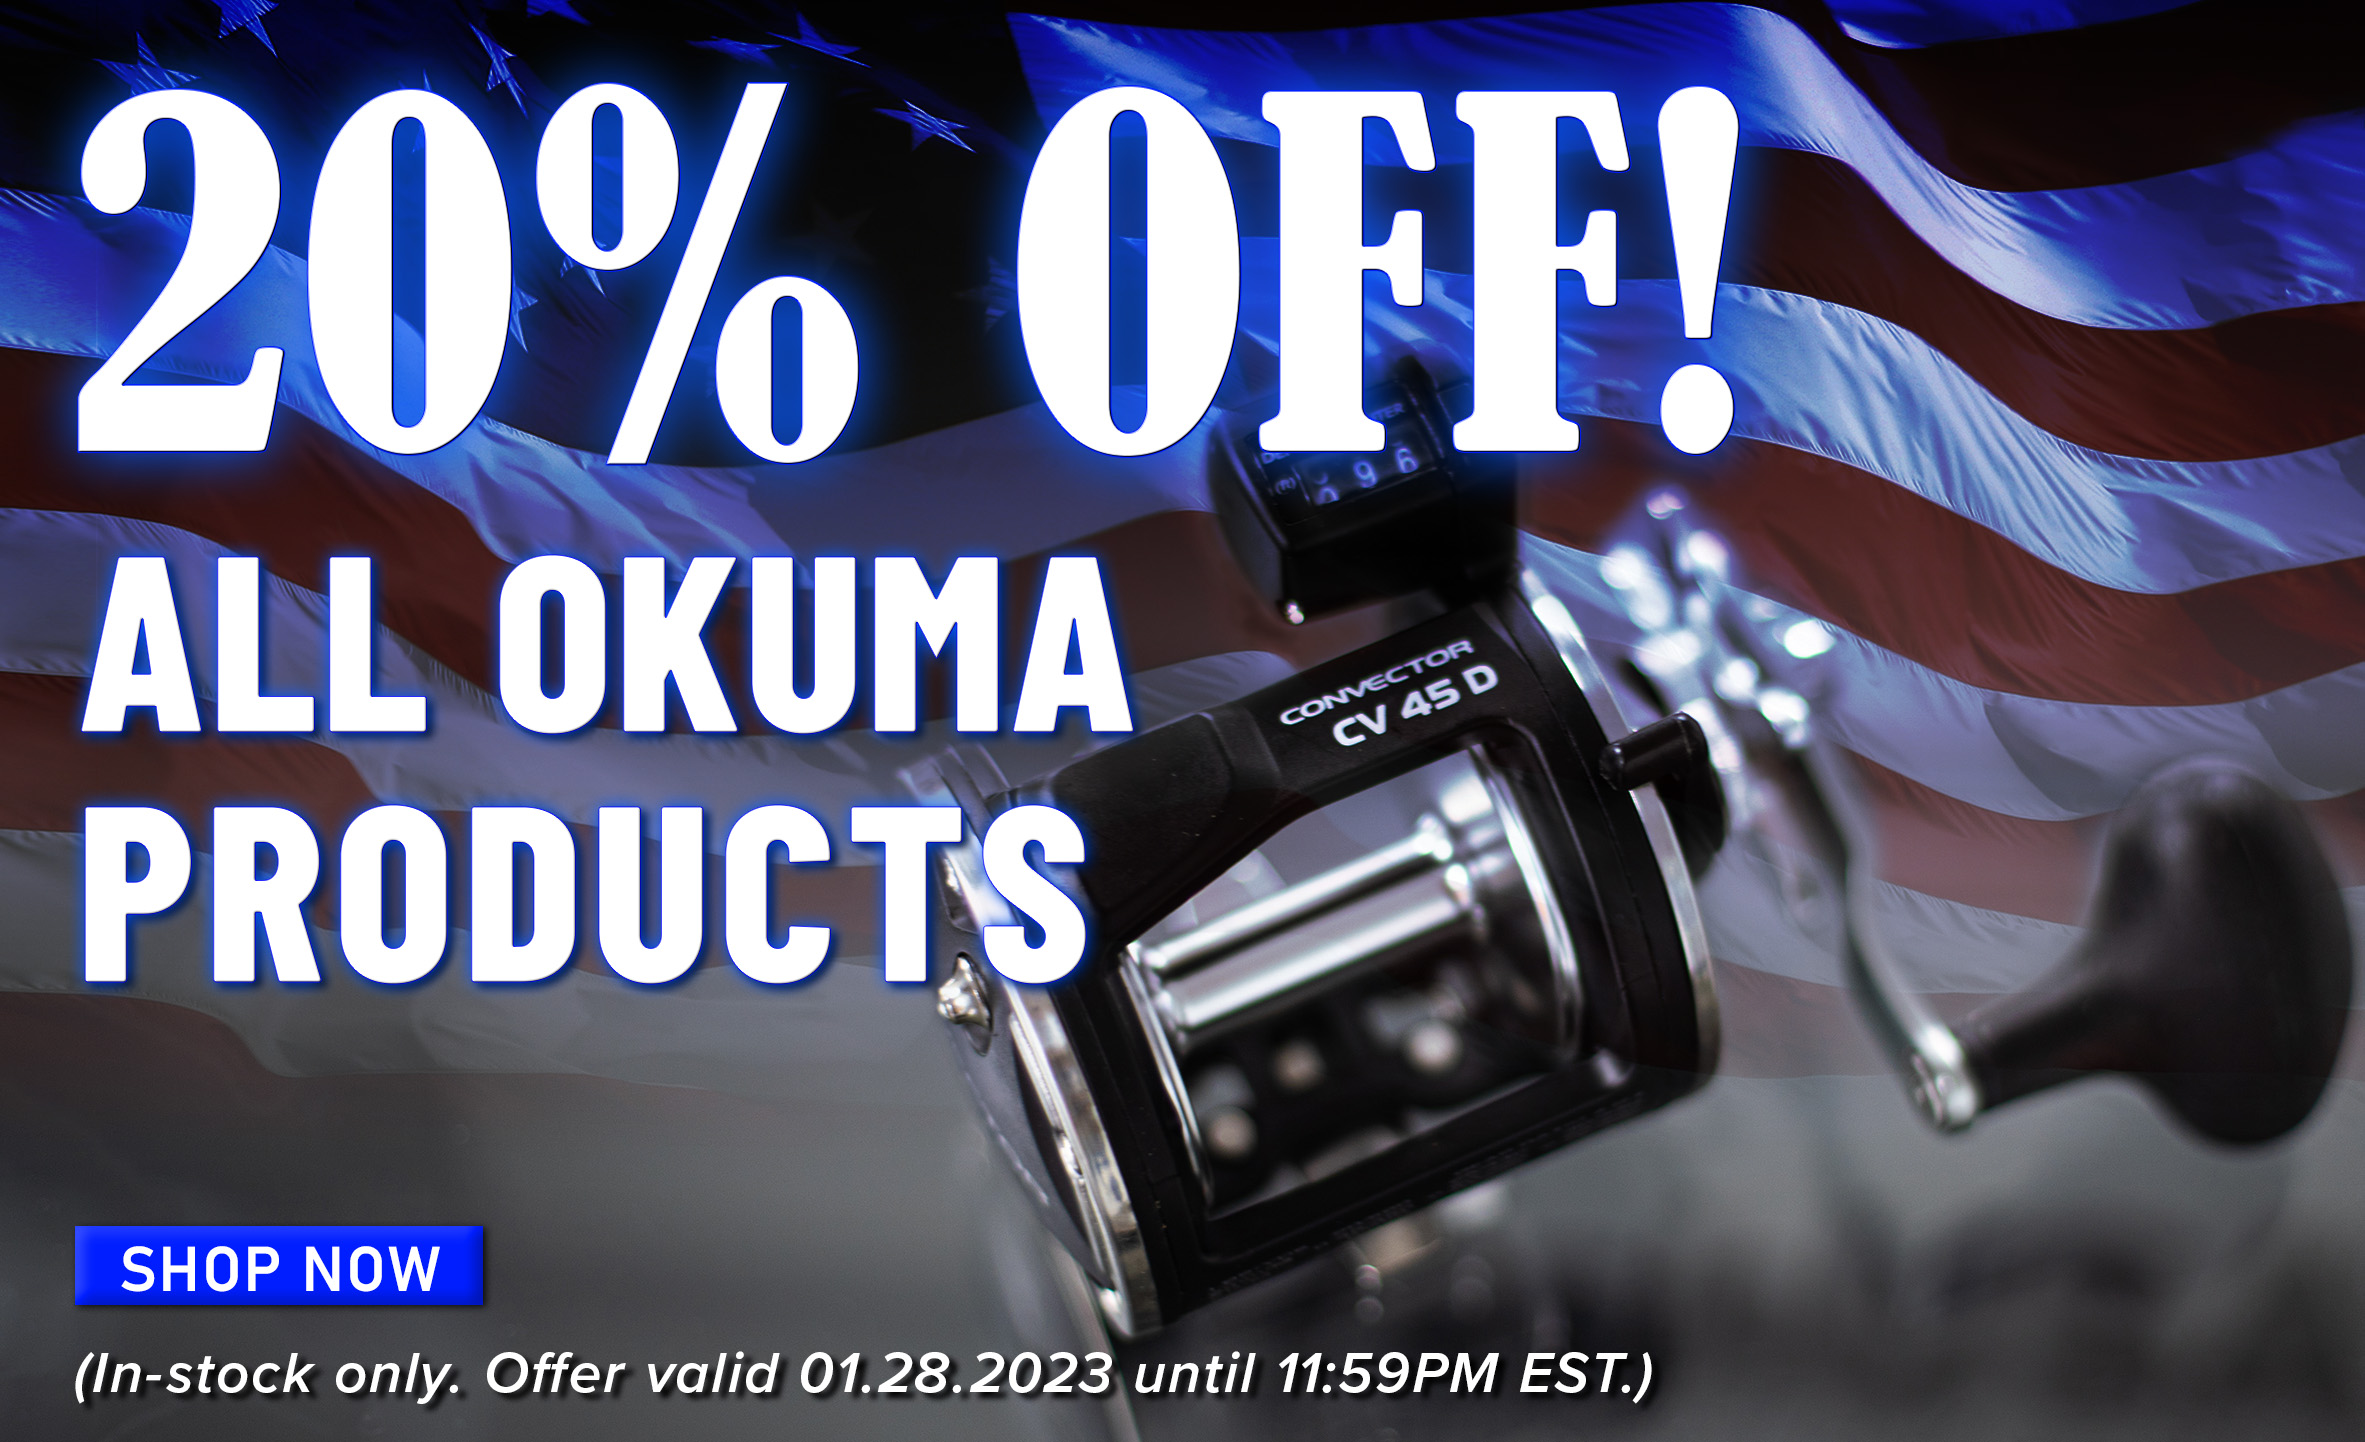 20% Off! All Okuma Products Shop Now (In-stock only. Offer valid 01.28.2023 until 11:59 PM EST.)